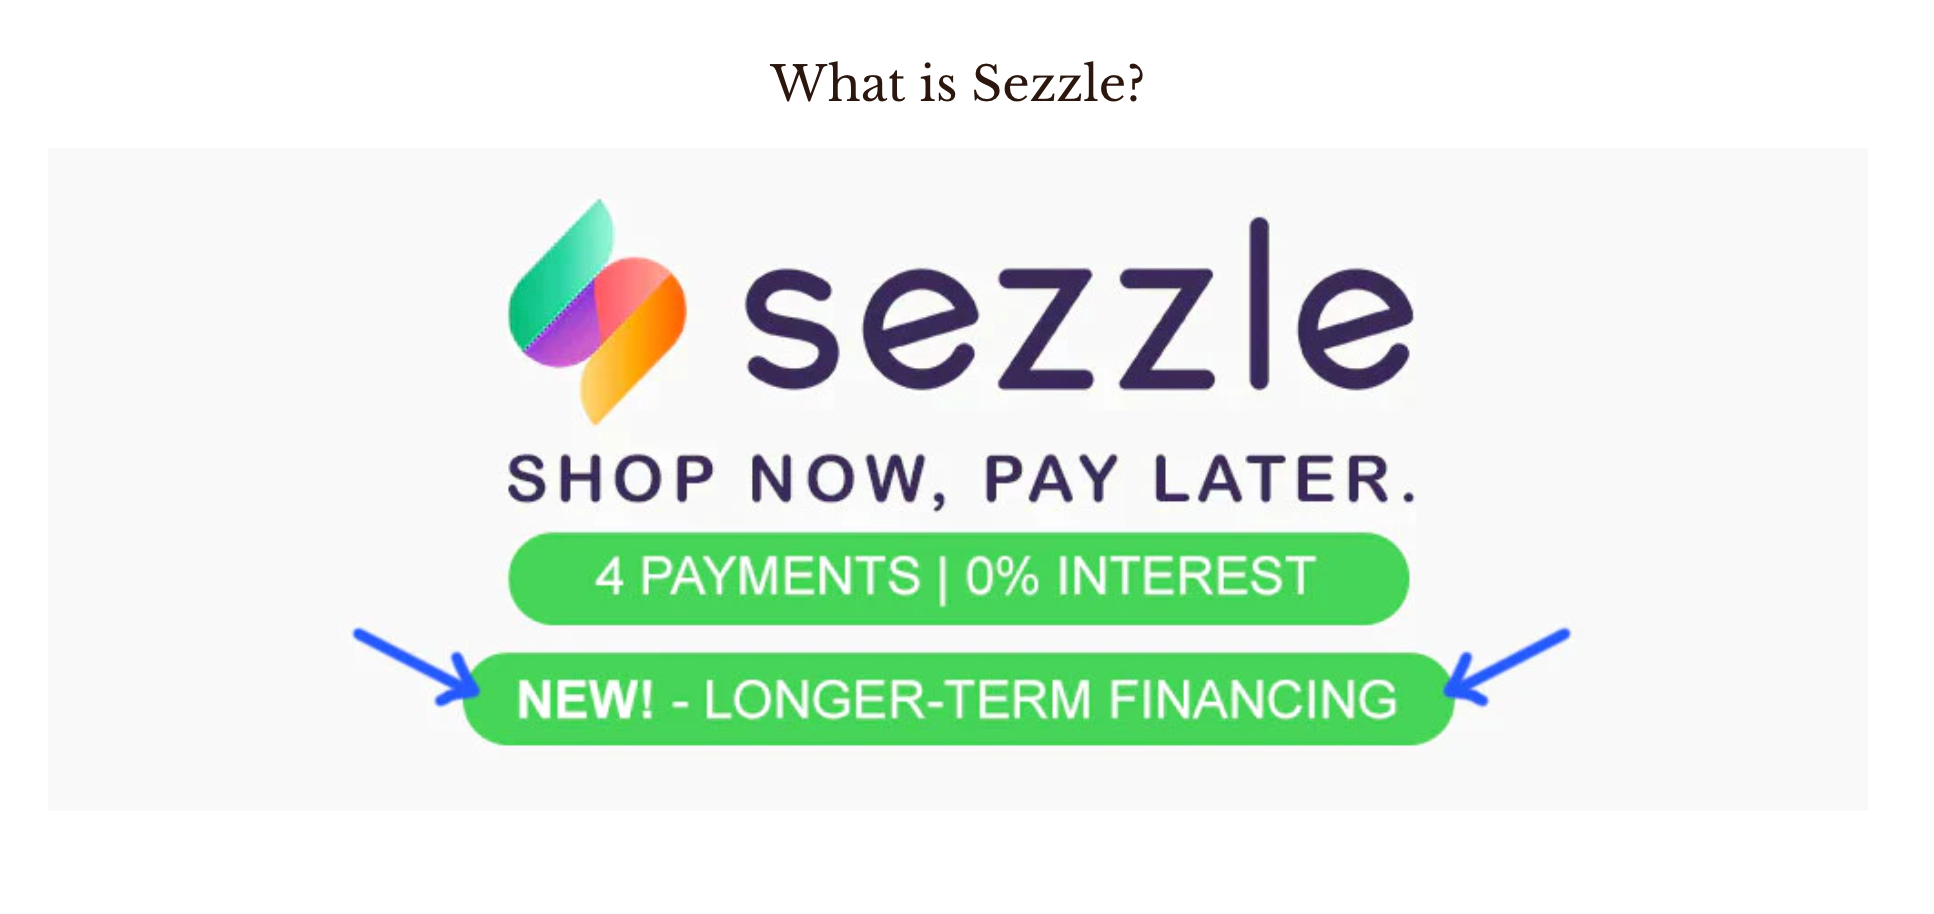 Buy Now Pay Later with Sezzle